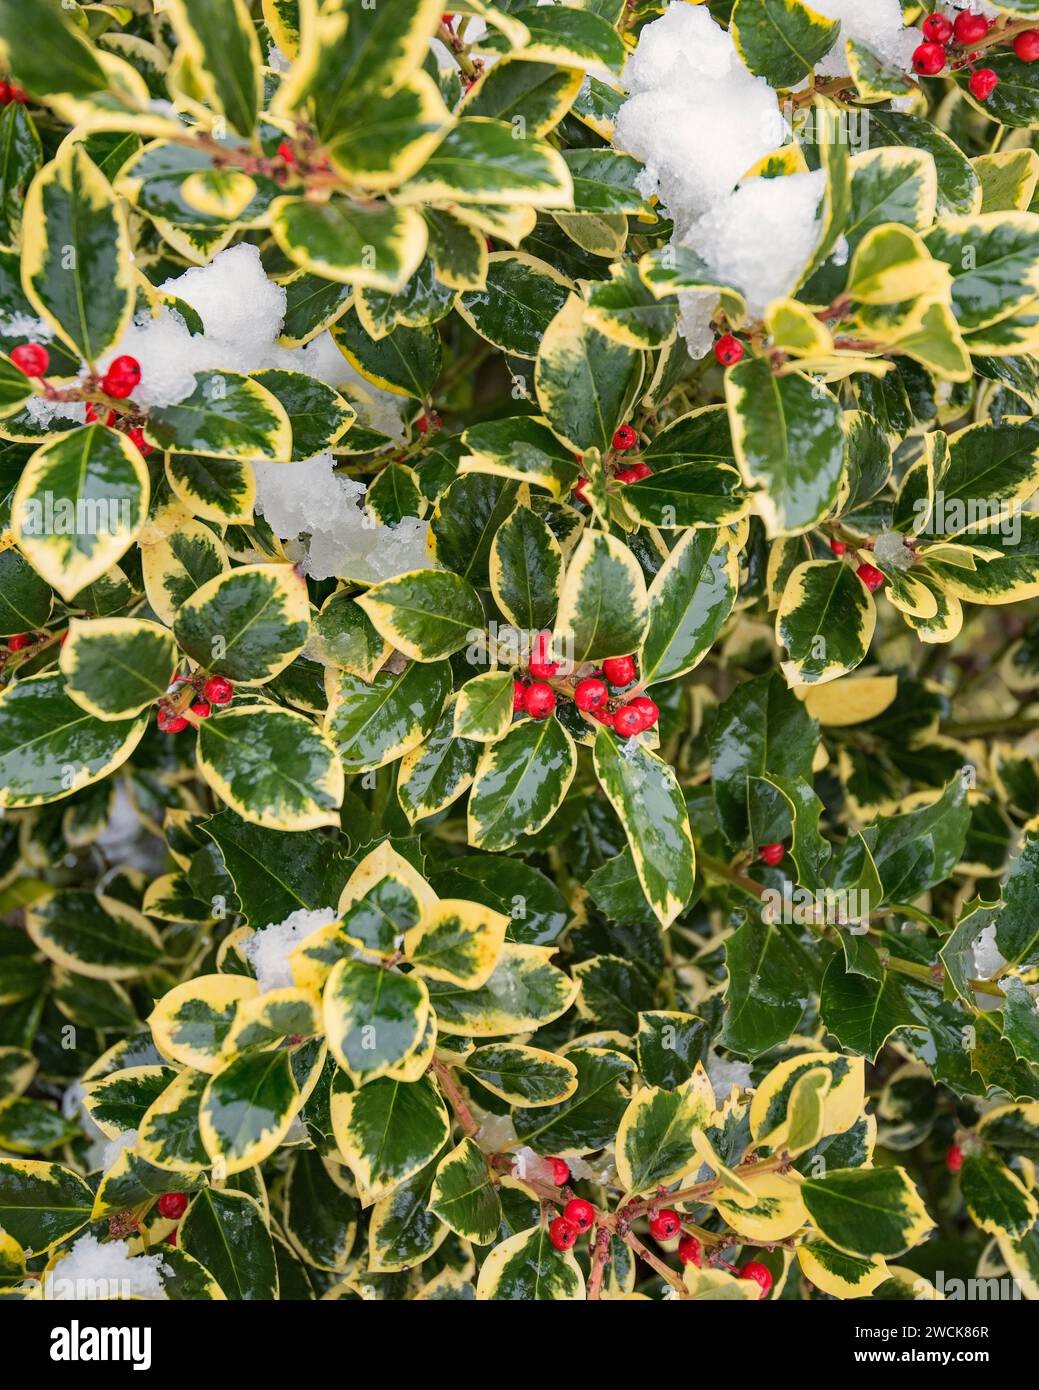 The boundary between Ilex altaclarensis and Ilex aquifolium can be blurred due to their shared characteristics e.g.  larger leaves than common holly. Stock Photo